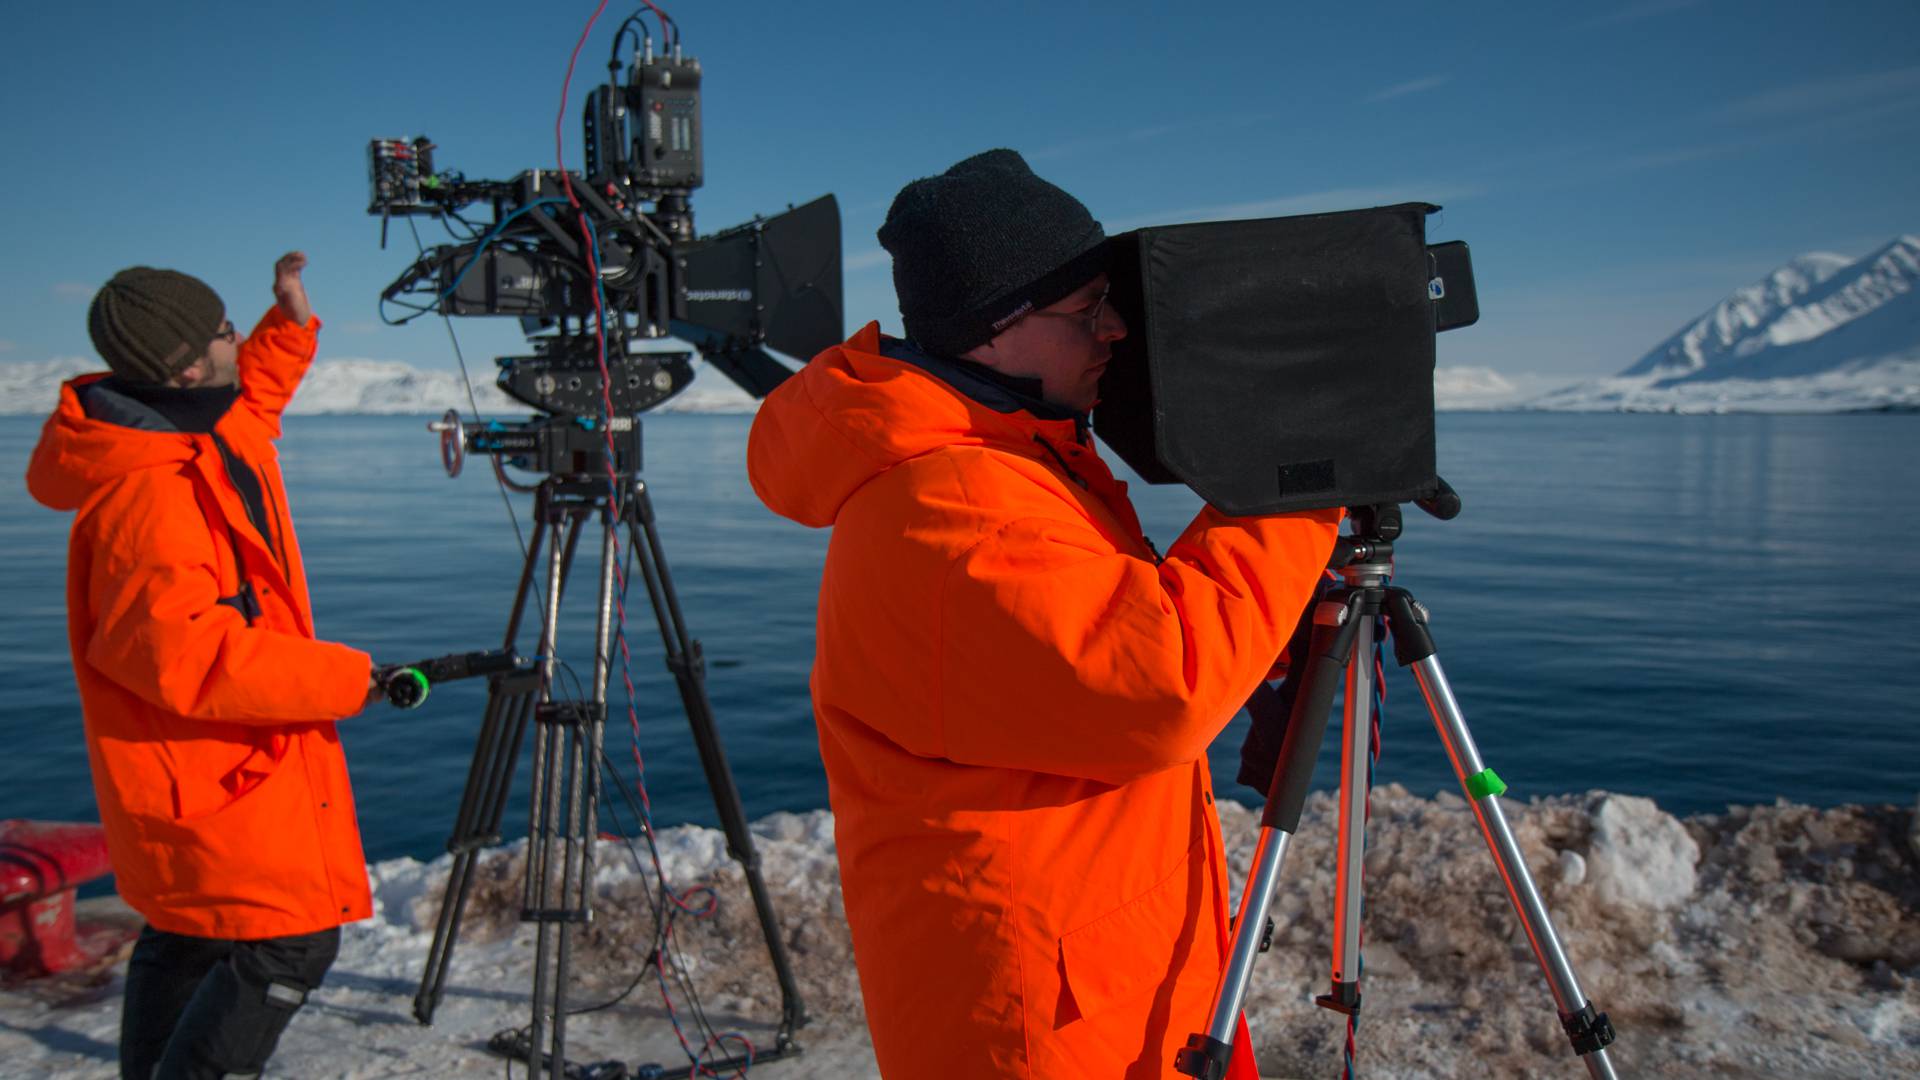 Making a movie in the most northern village